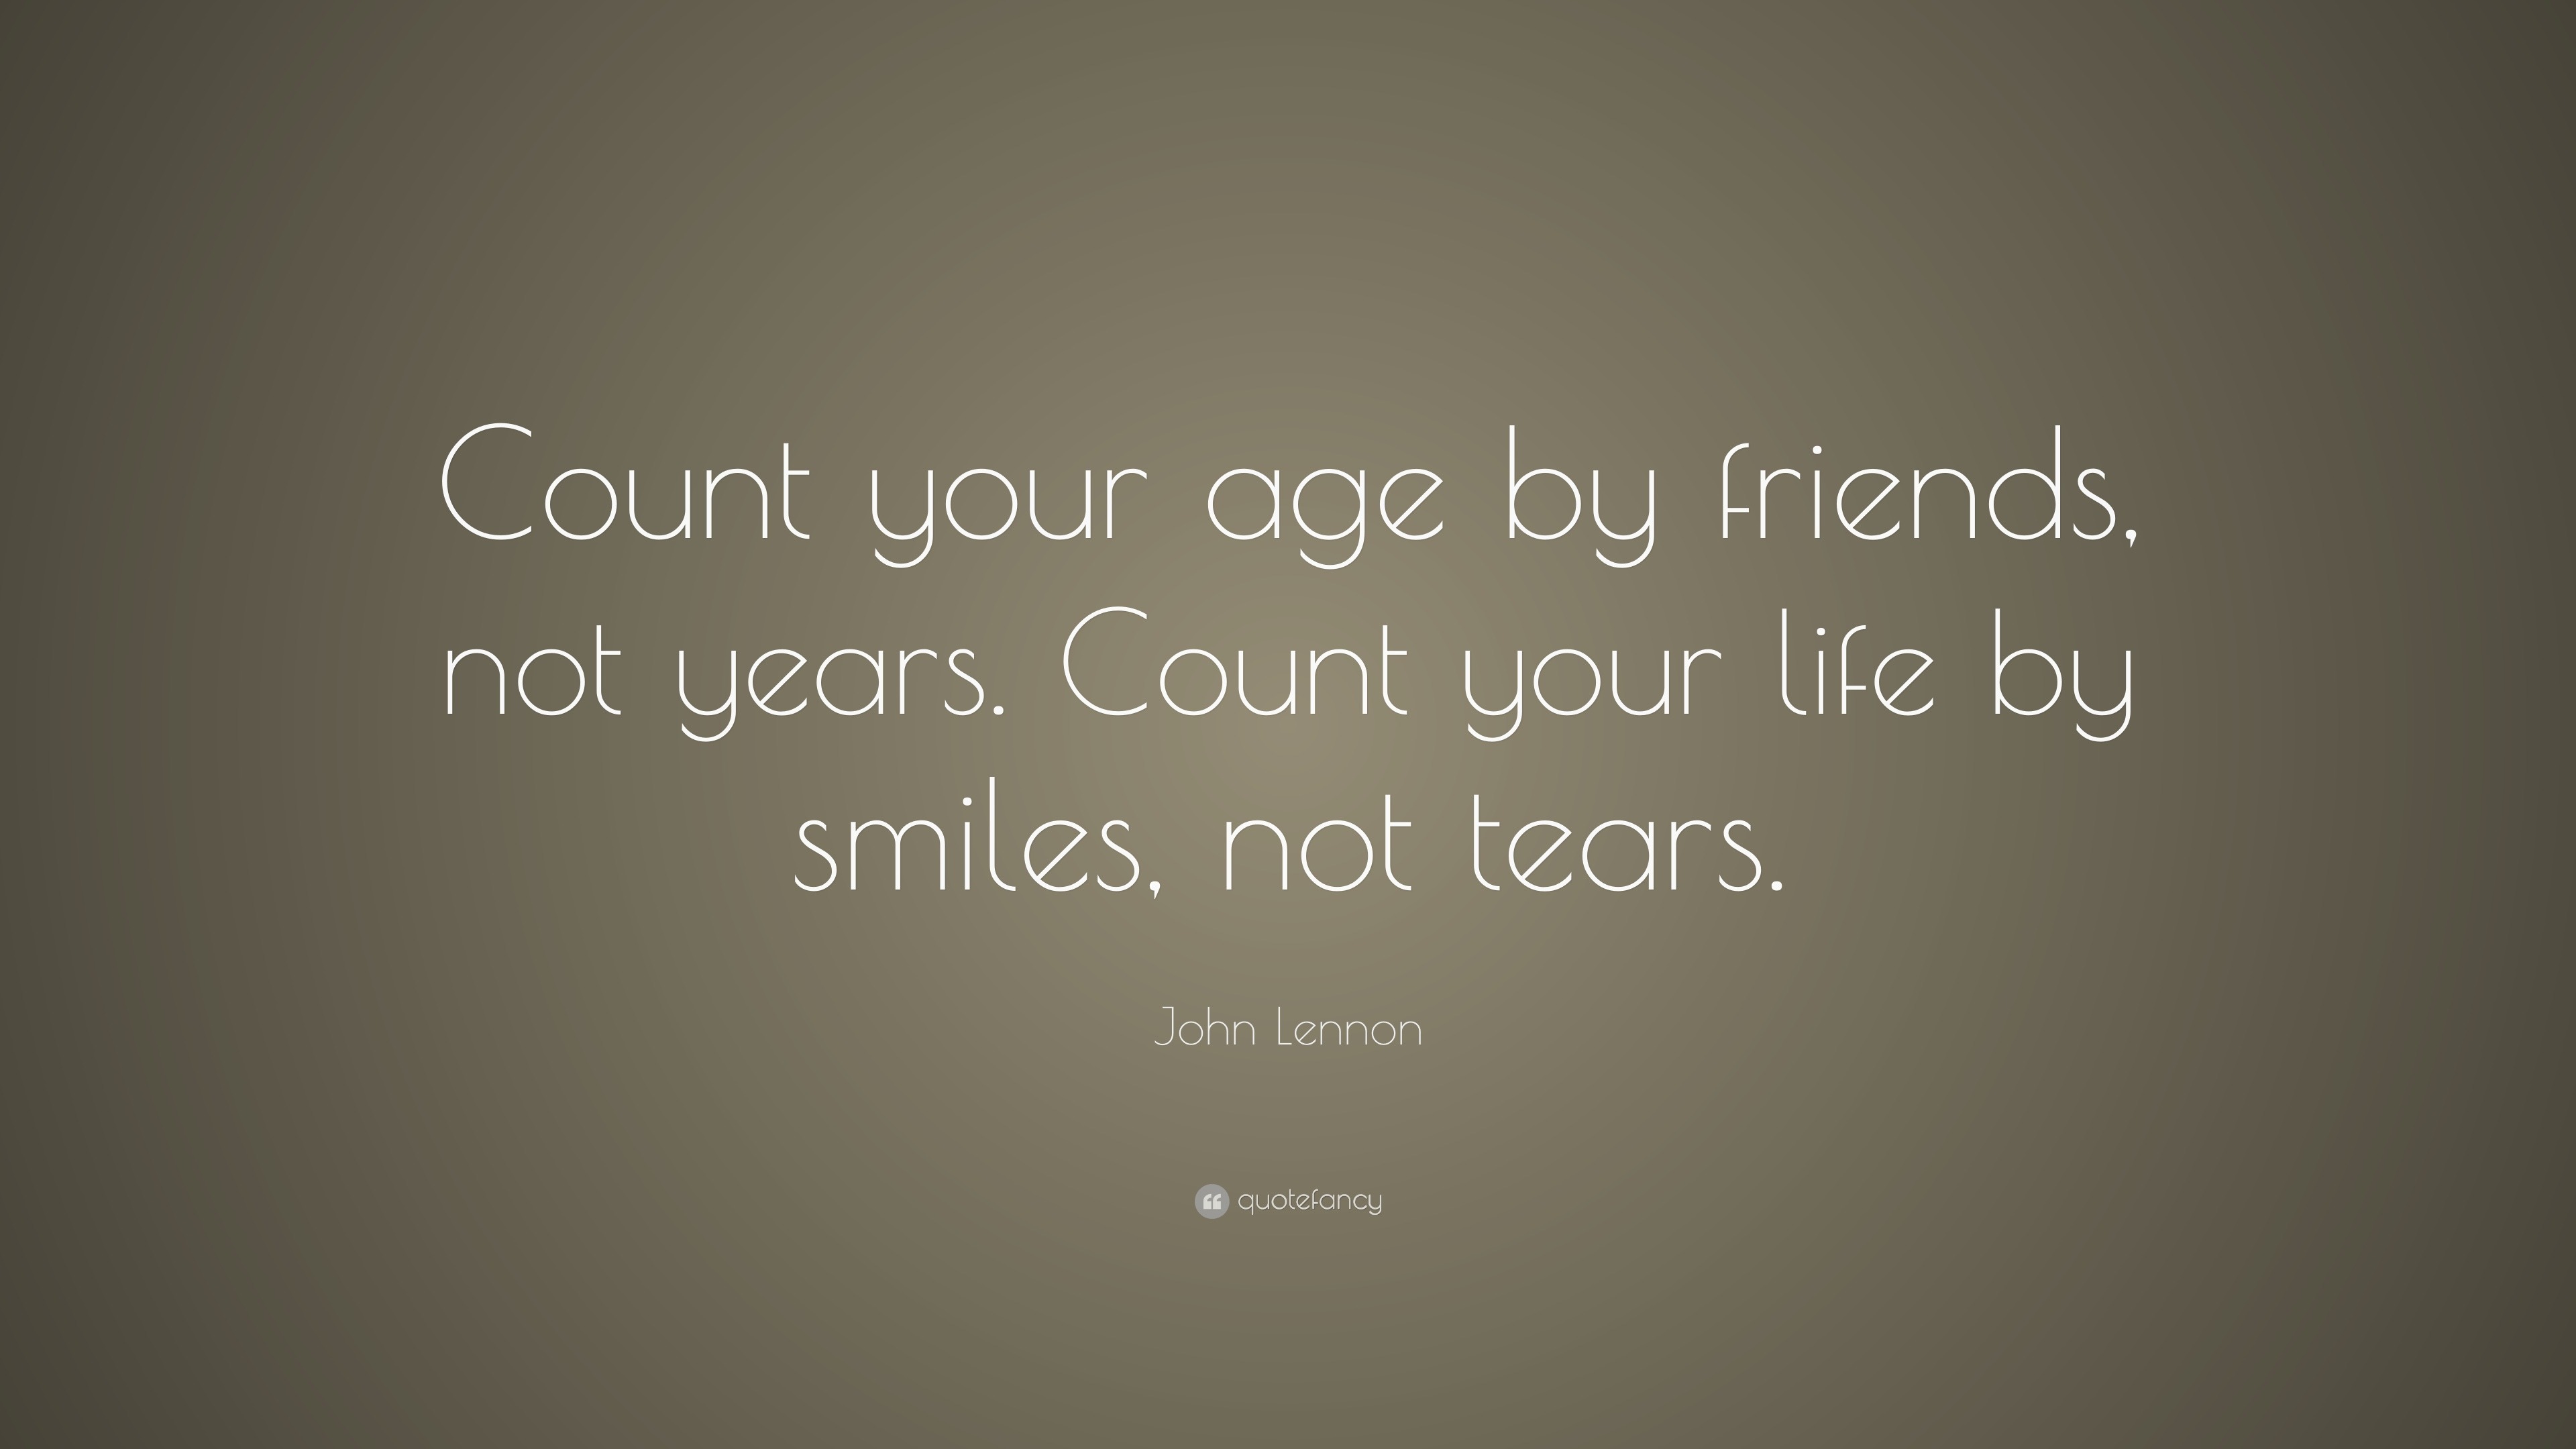 John Lennon Quote “Count your age by friends not years Count your